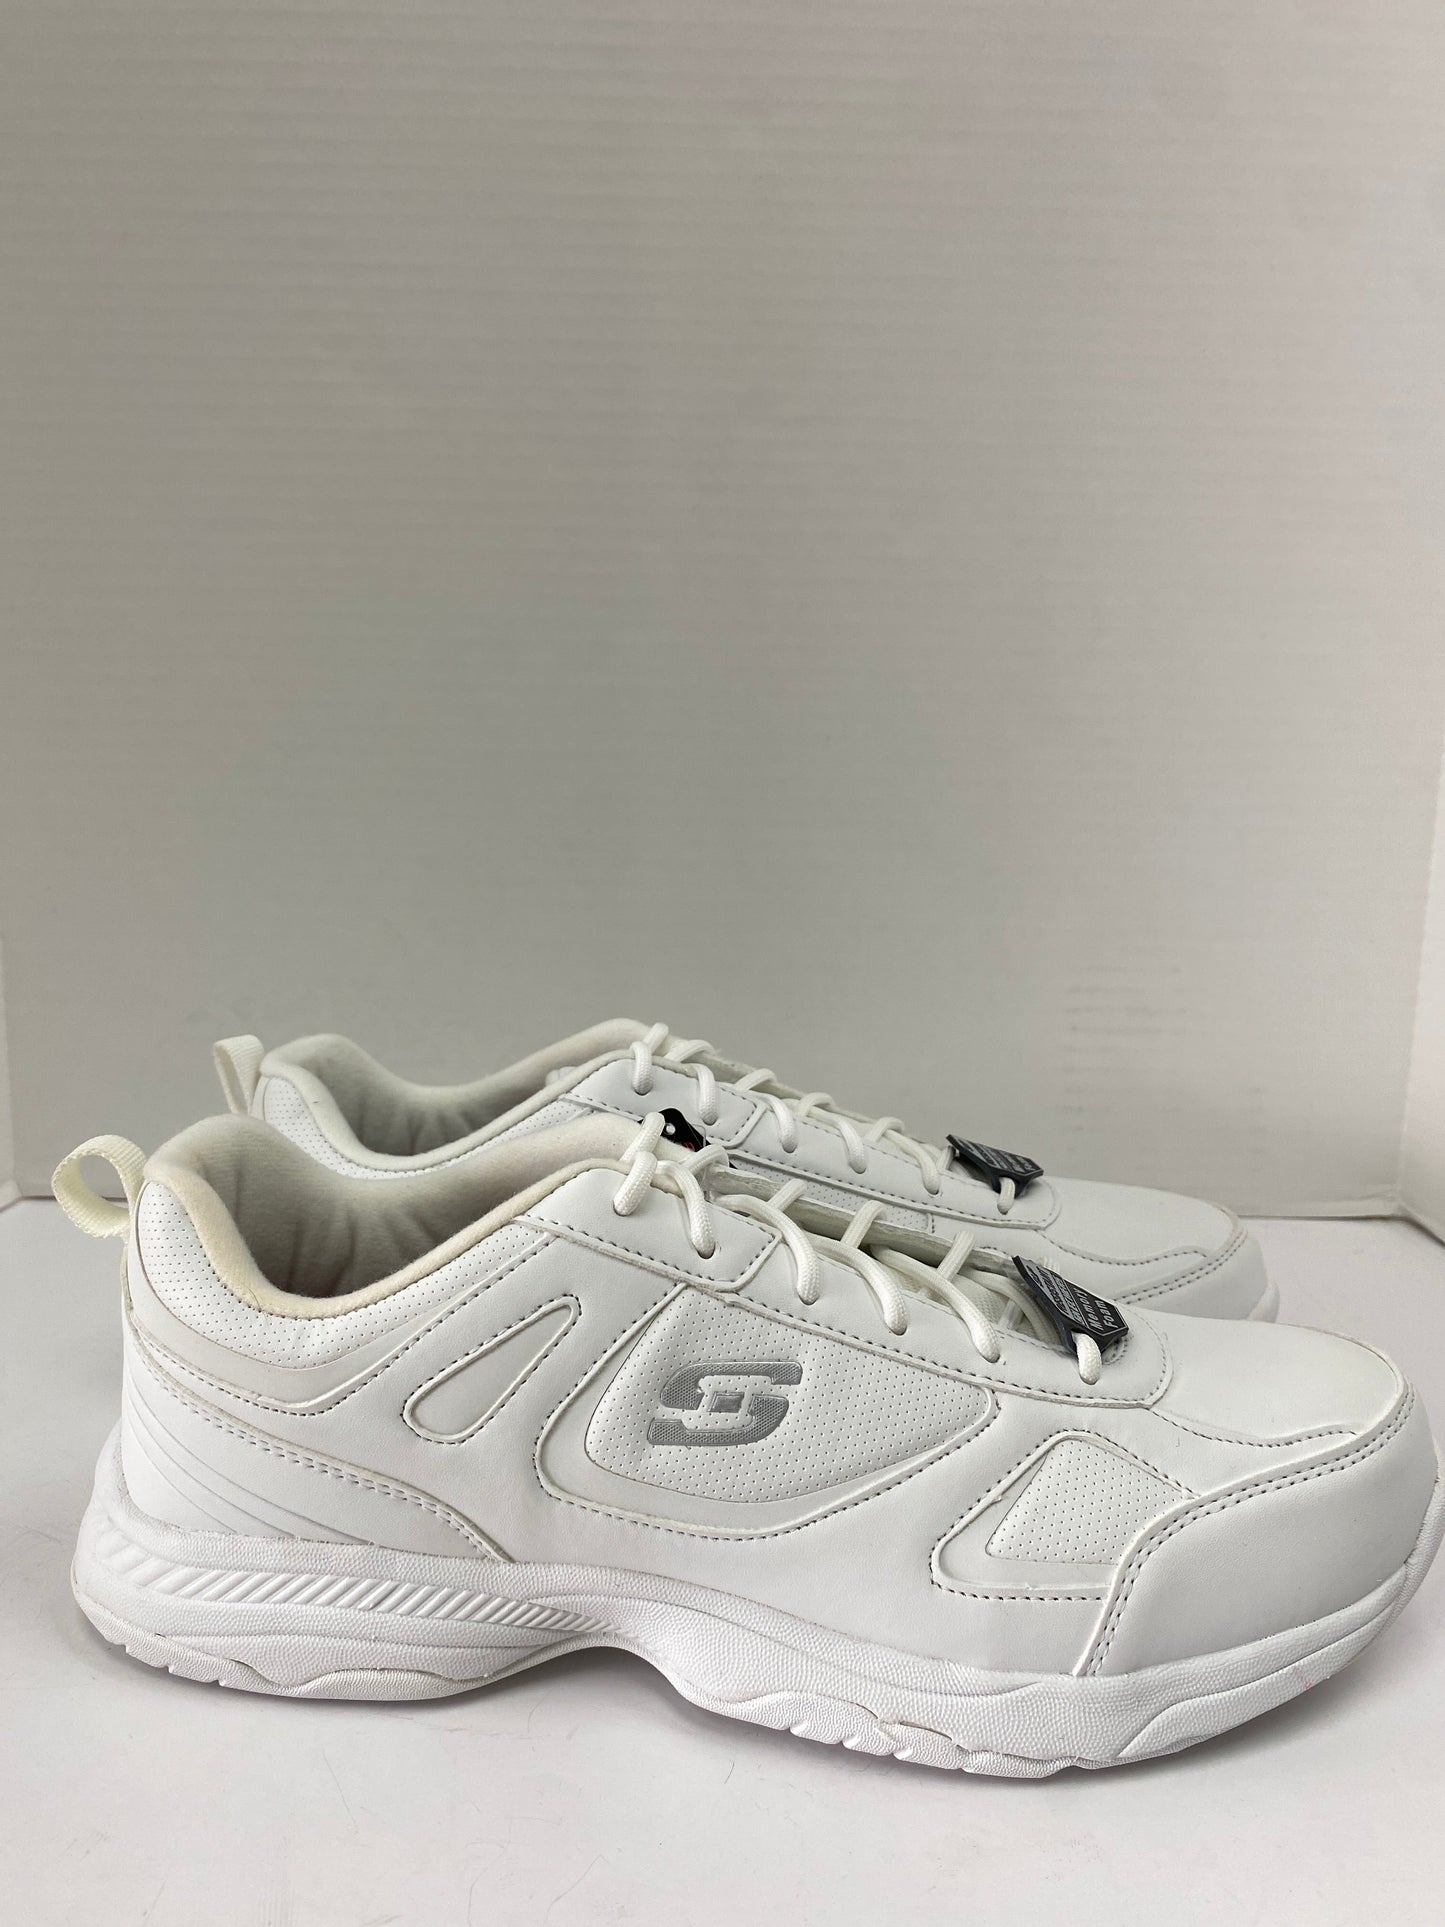 Shoes Athletic By Skechers  Size: 12